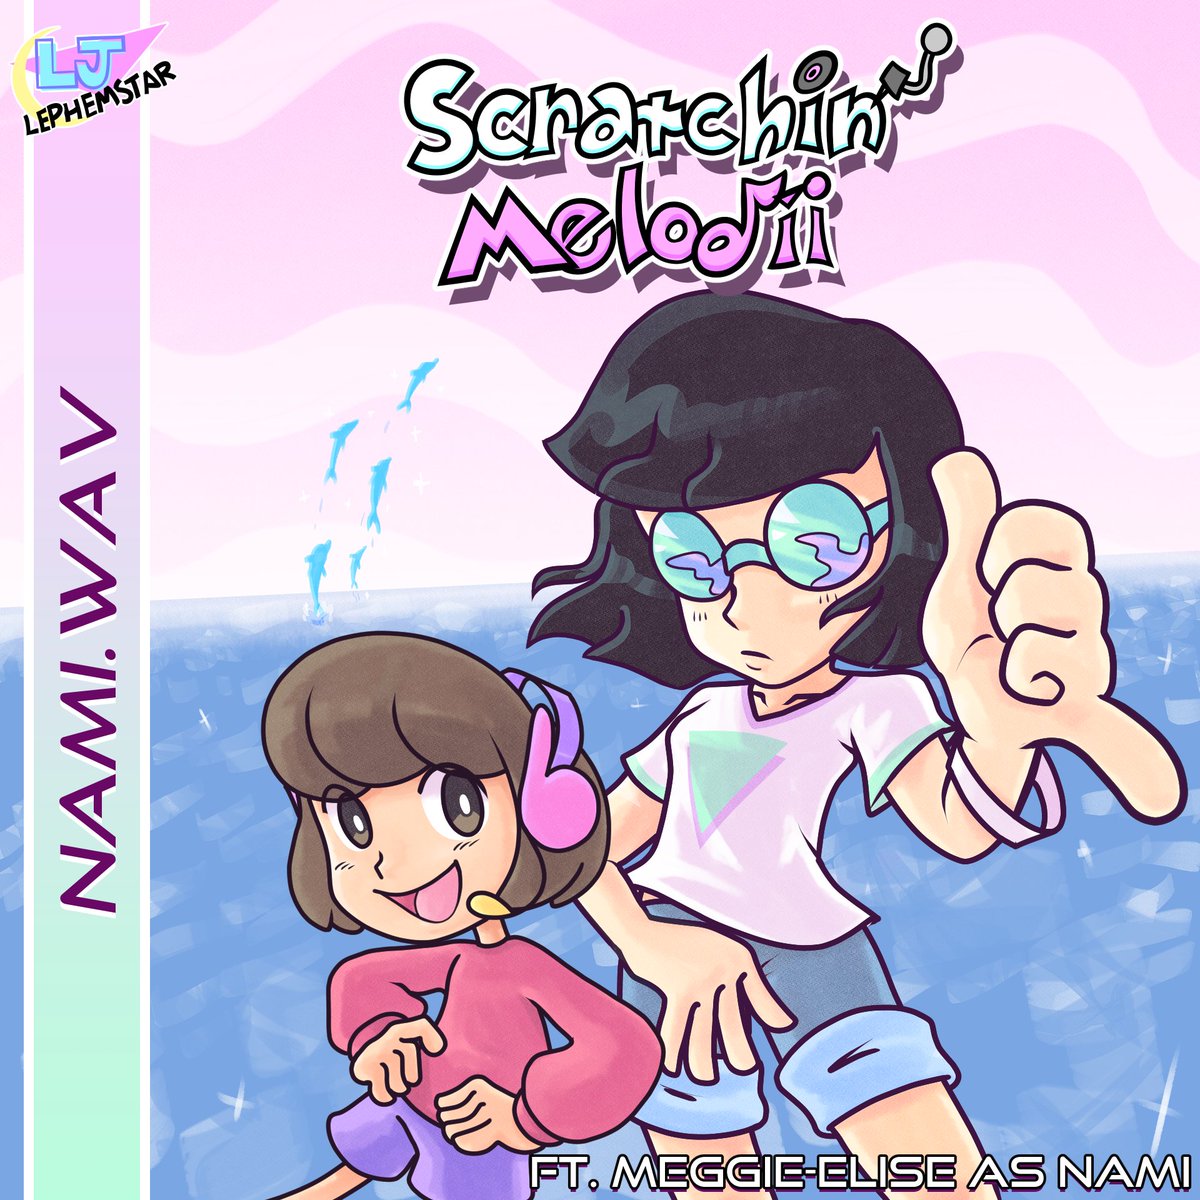 The new Scratchin' Melodii songs are now up on YouTube, Soundcloud, and Bandcamp! 